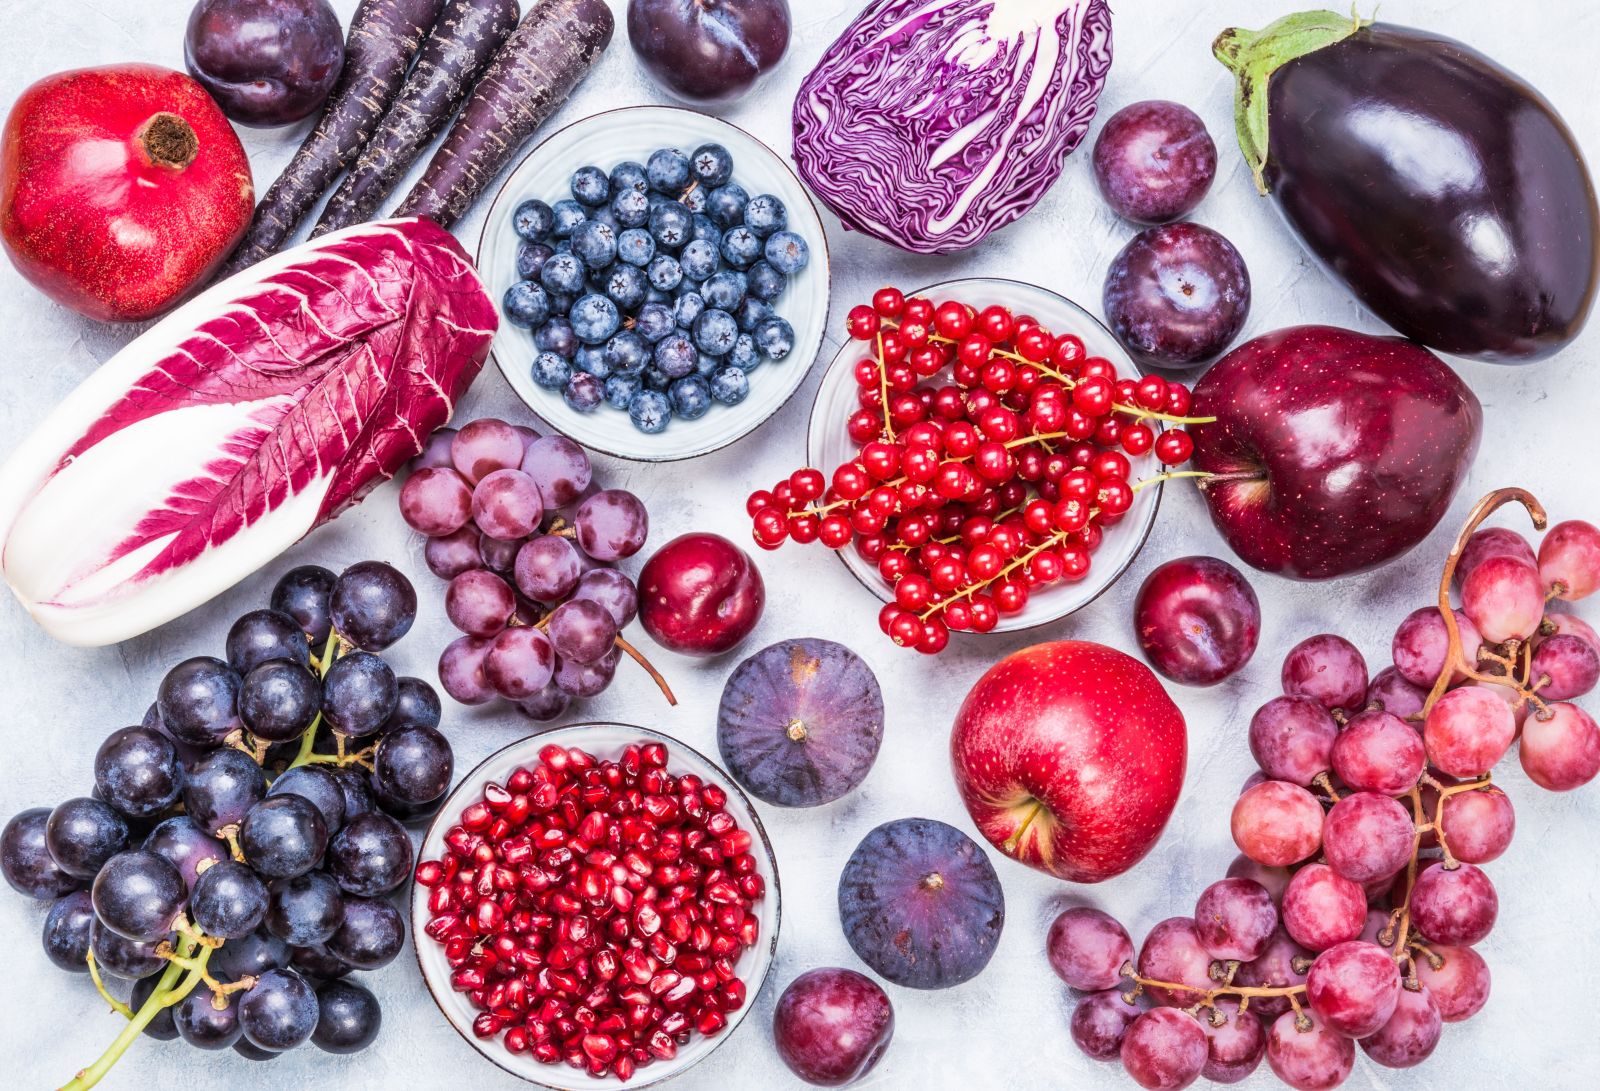 Purple and red color fruits and vegetables ingredients top view on rustic white background.